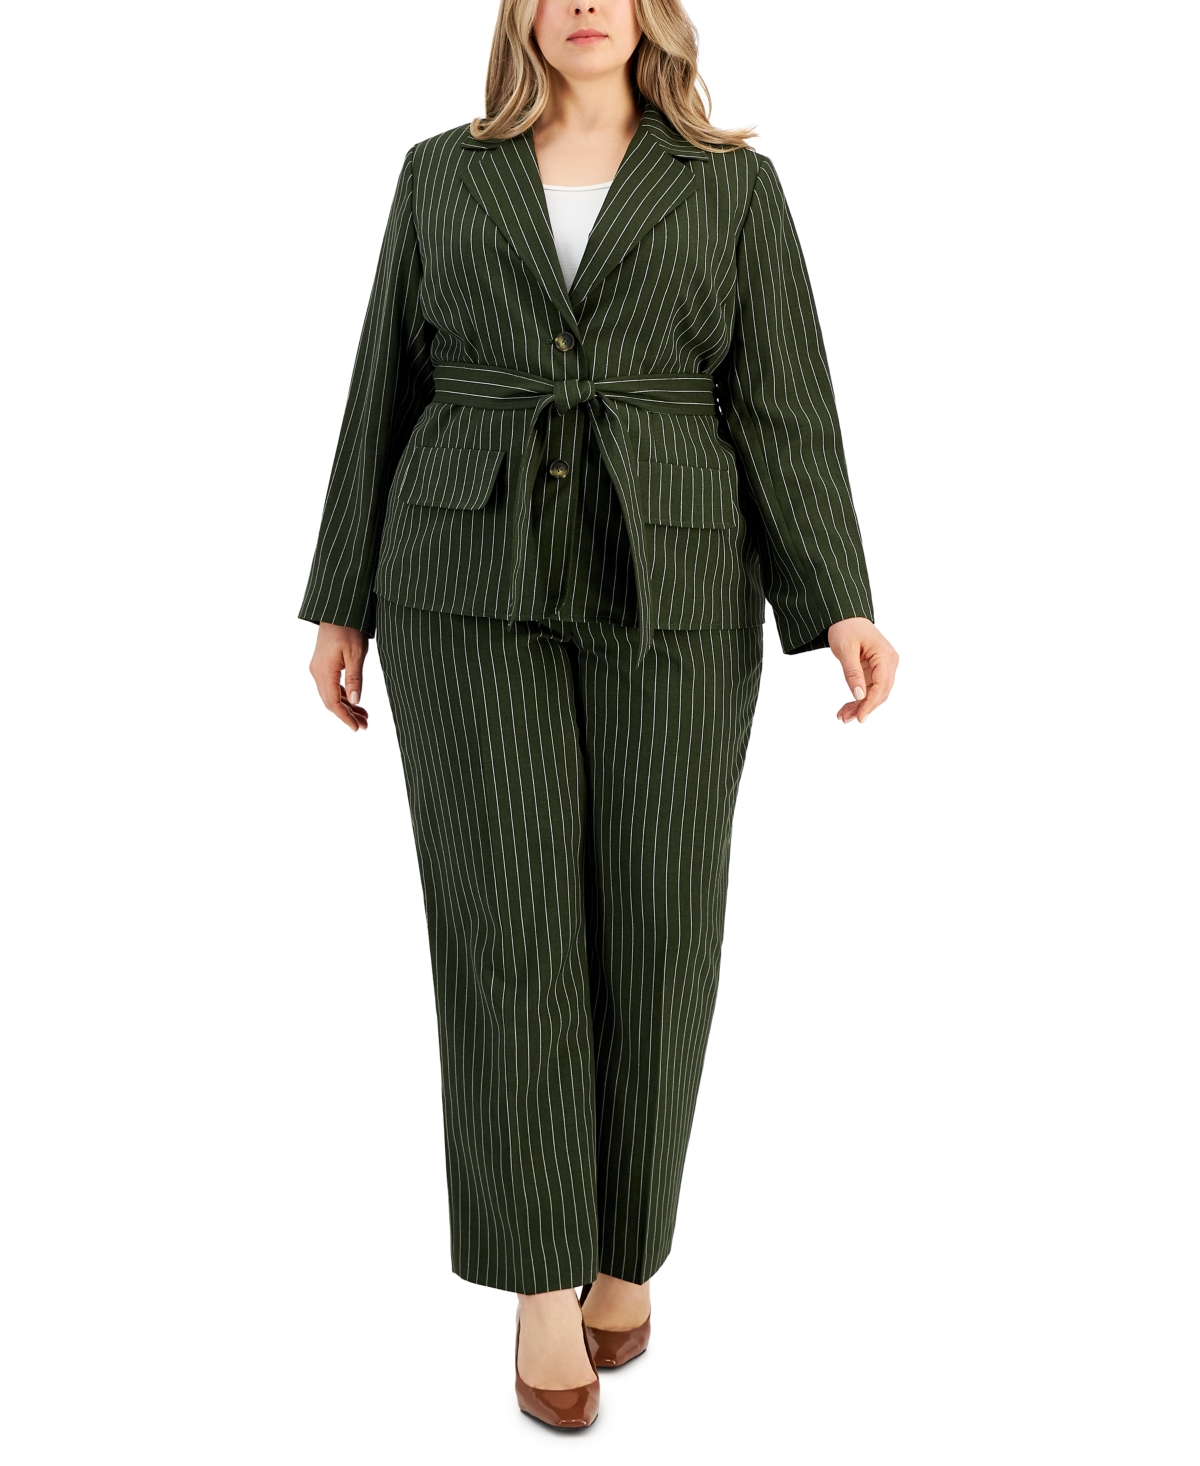 Plus Size Striped Belted Pantsuit - Black/White